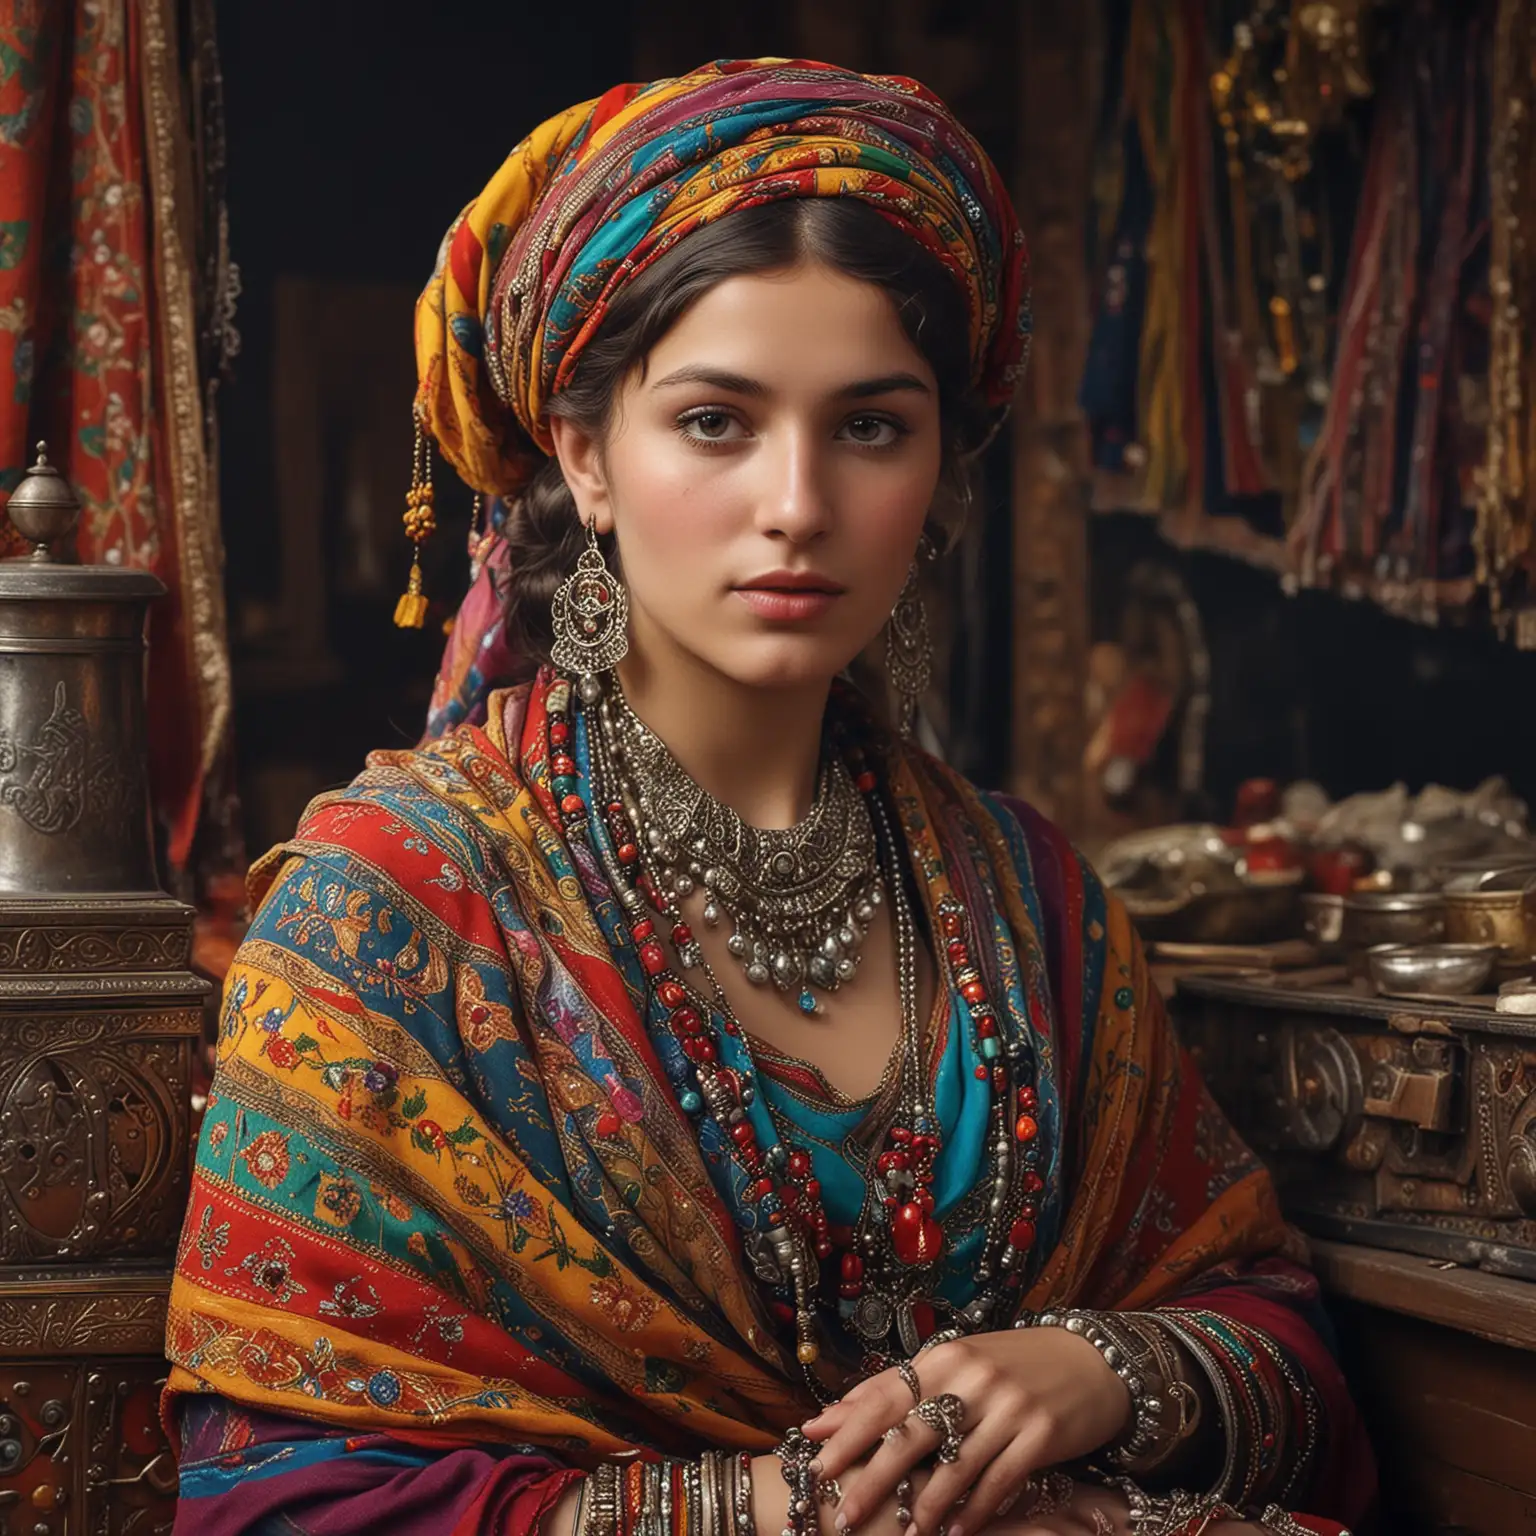 Young Gypsy Woman in Traditional Dress with Ornate Scarf and Jewelry